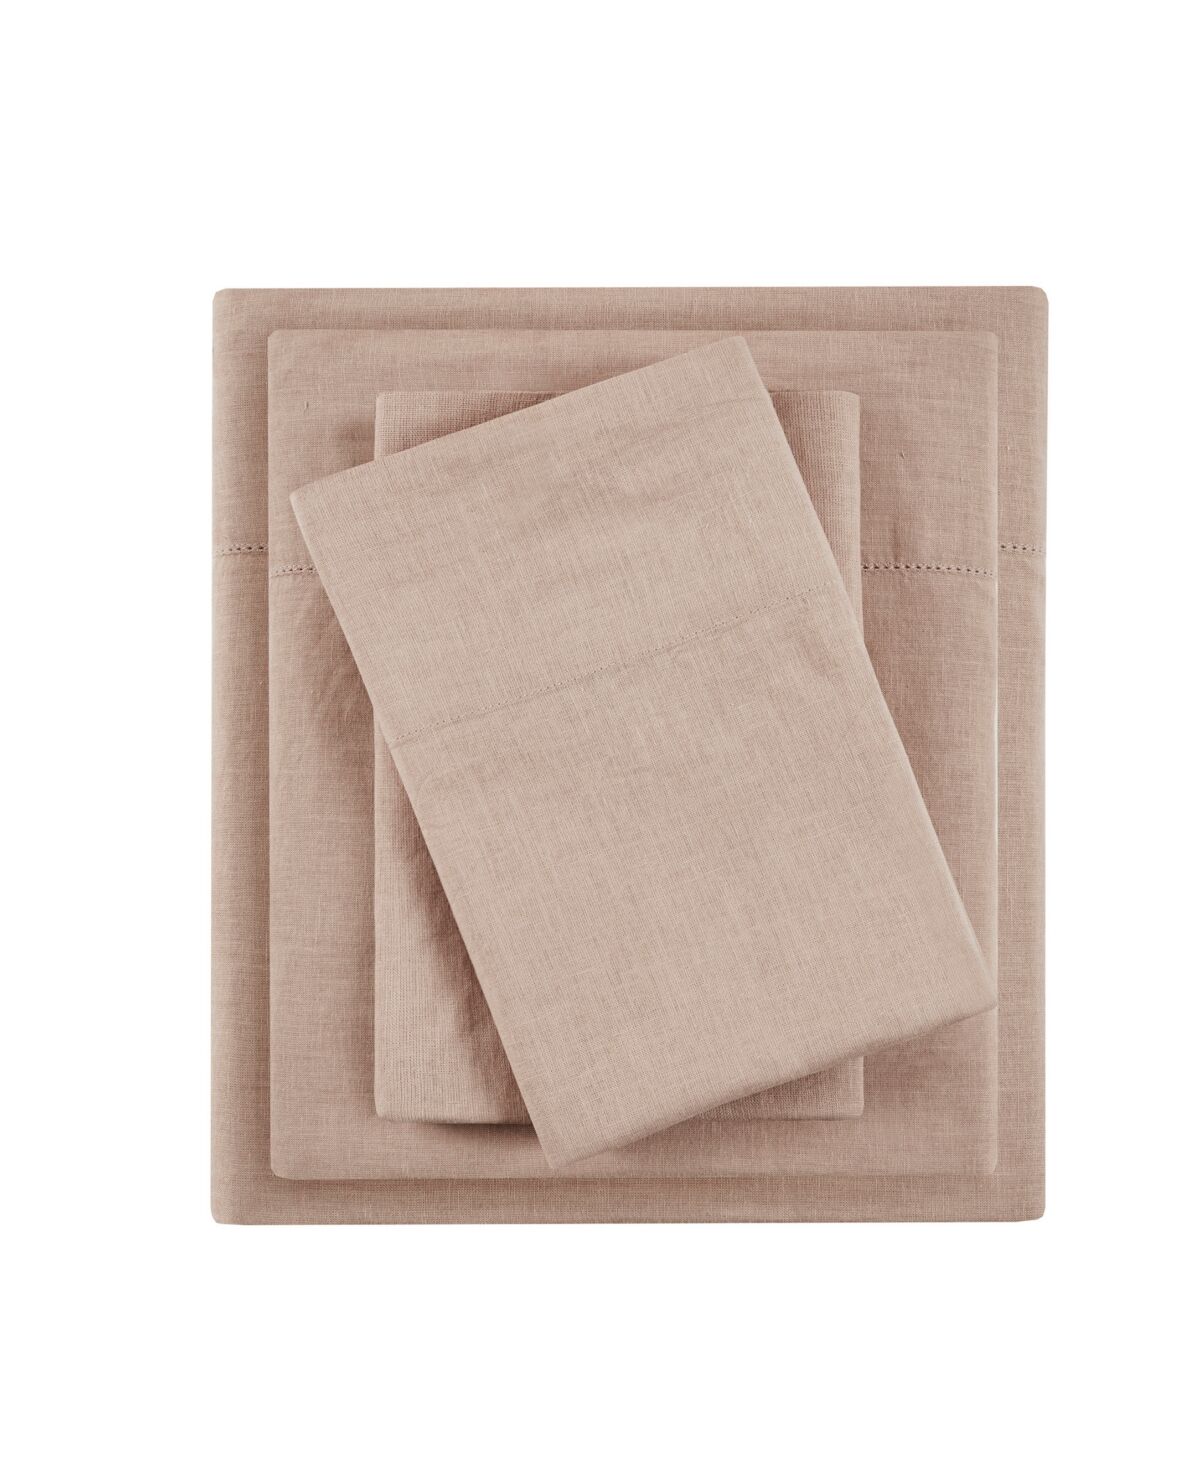 Madison Park Pre-Washed 4-Pc. Sheet Set, Queen - Warm Taupe